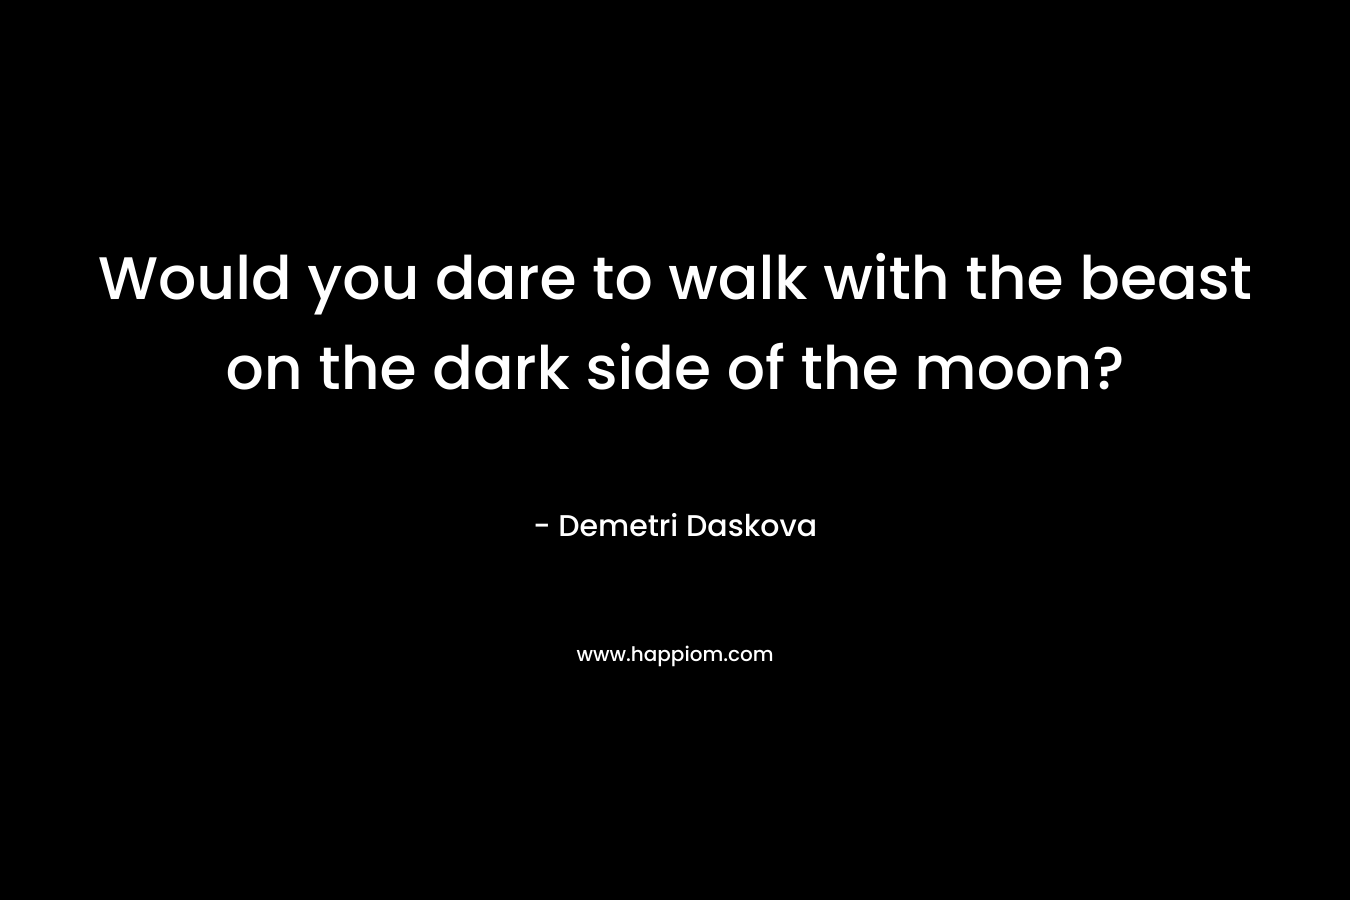 Would you dare to walk with the beast on the dark side of the moon?